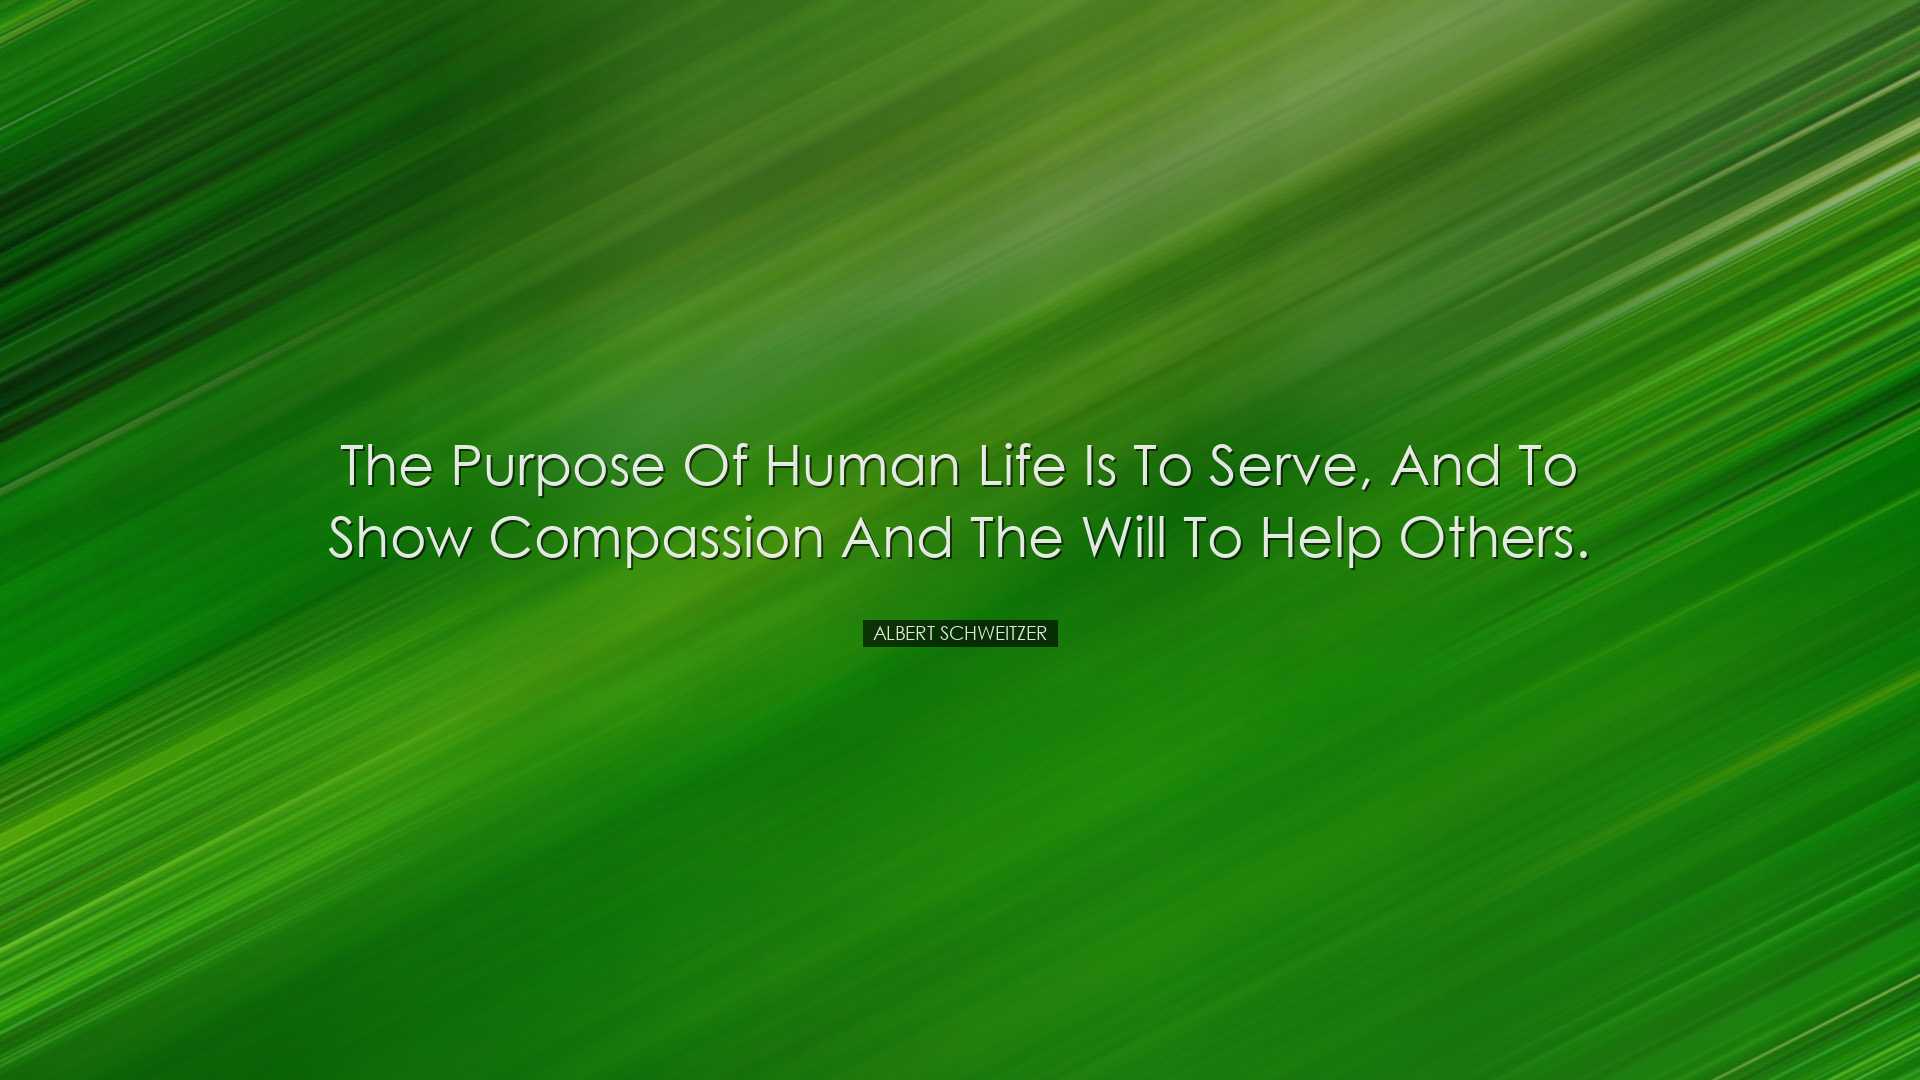 The purpose of human life is to serve, and to show compassion and